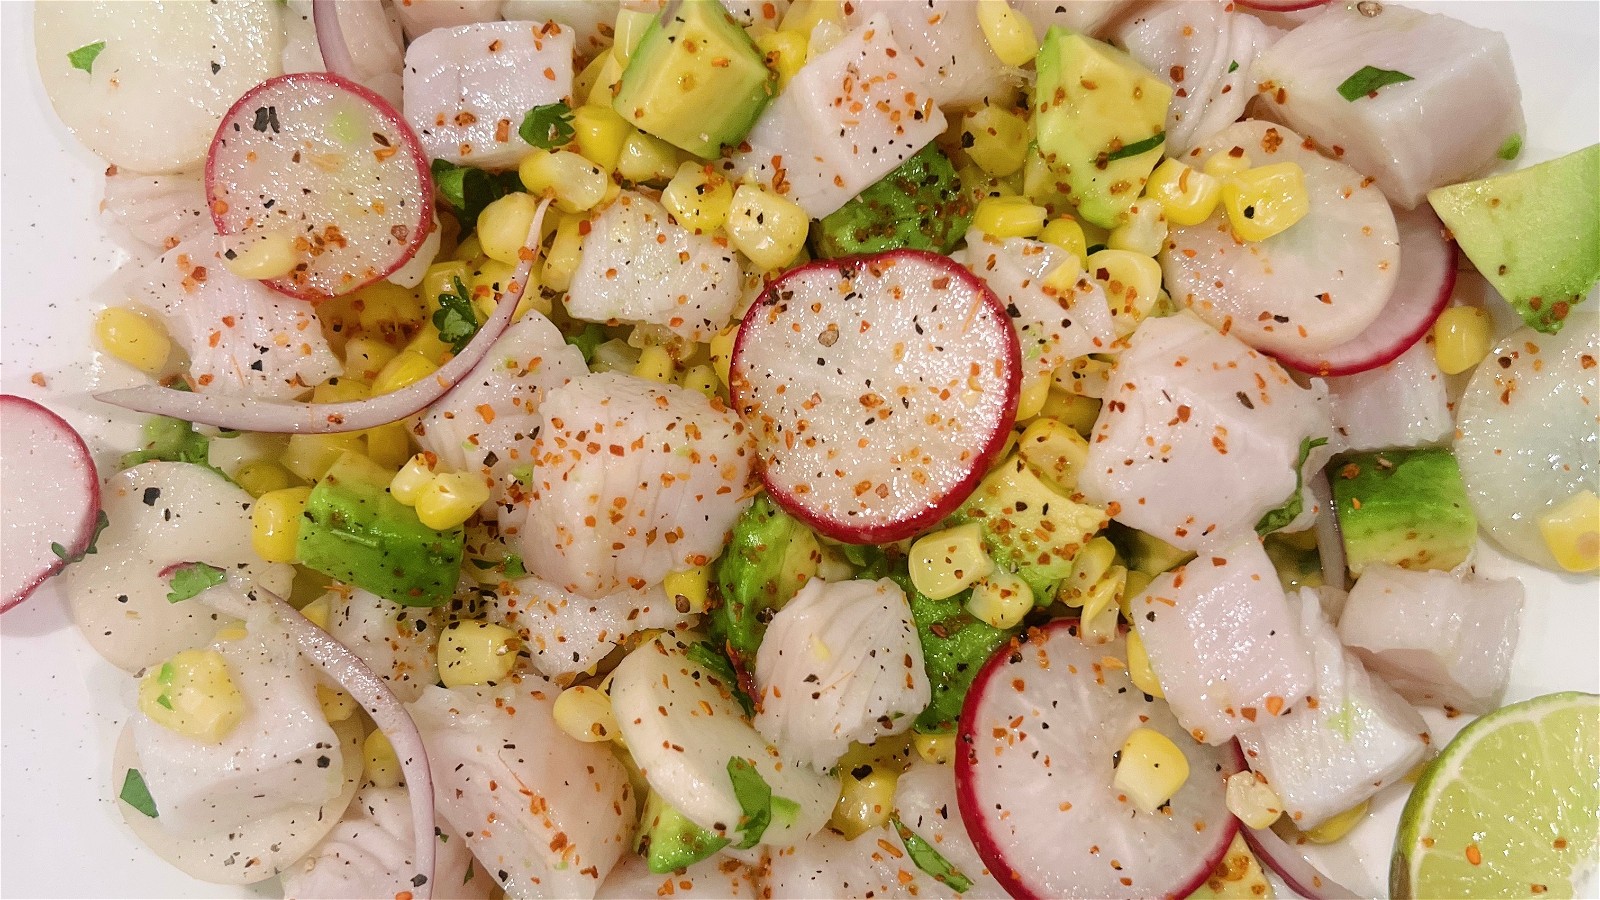 Image of Halibut Ceviche with Corn and Avocado